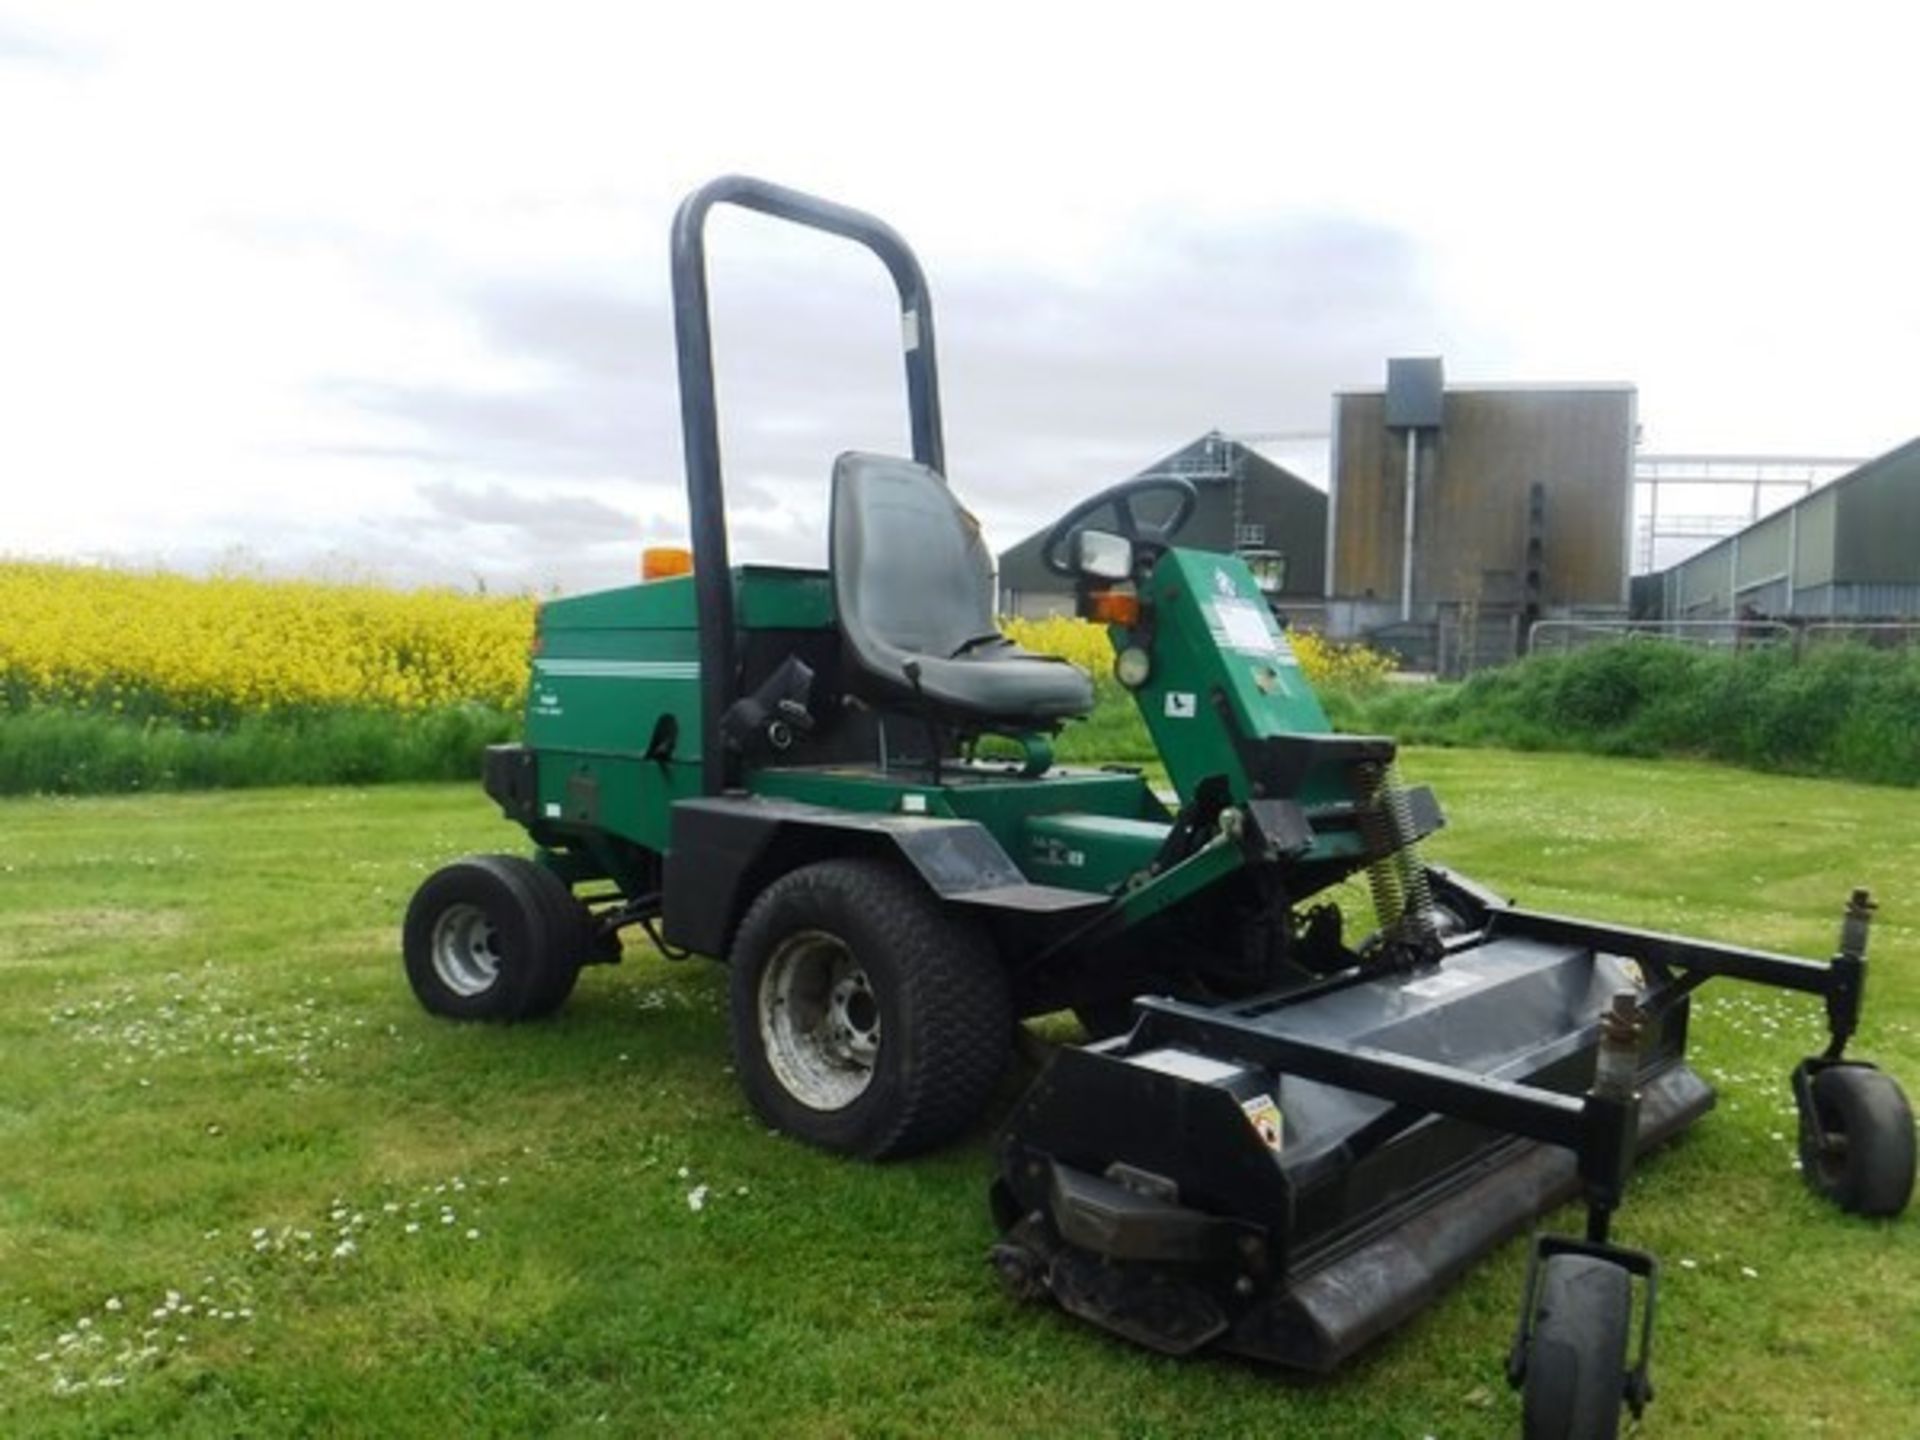 RANSOMES FRONT LINE 7280 ride on mower. Reg - Y106BSX. 4029hrs (not verified) - Image 7 of 13